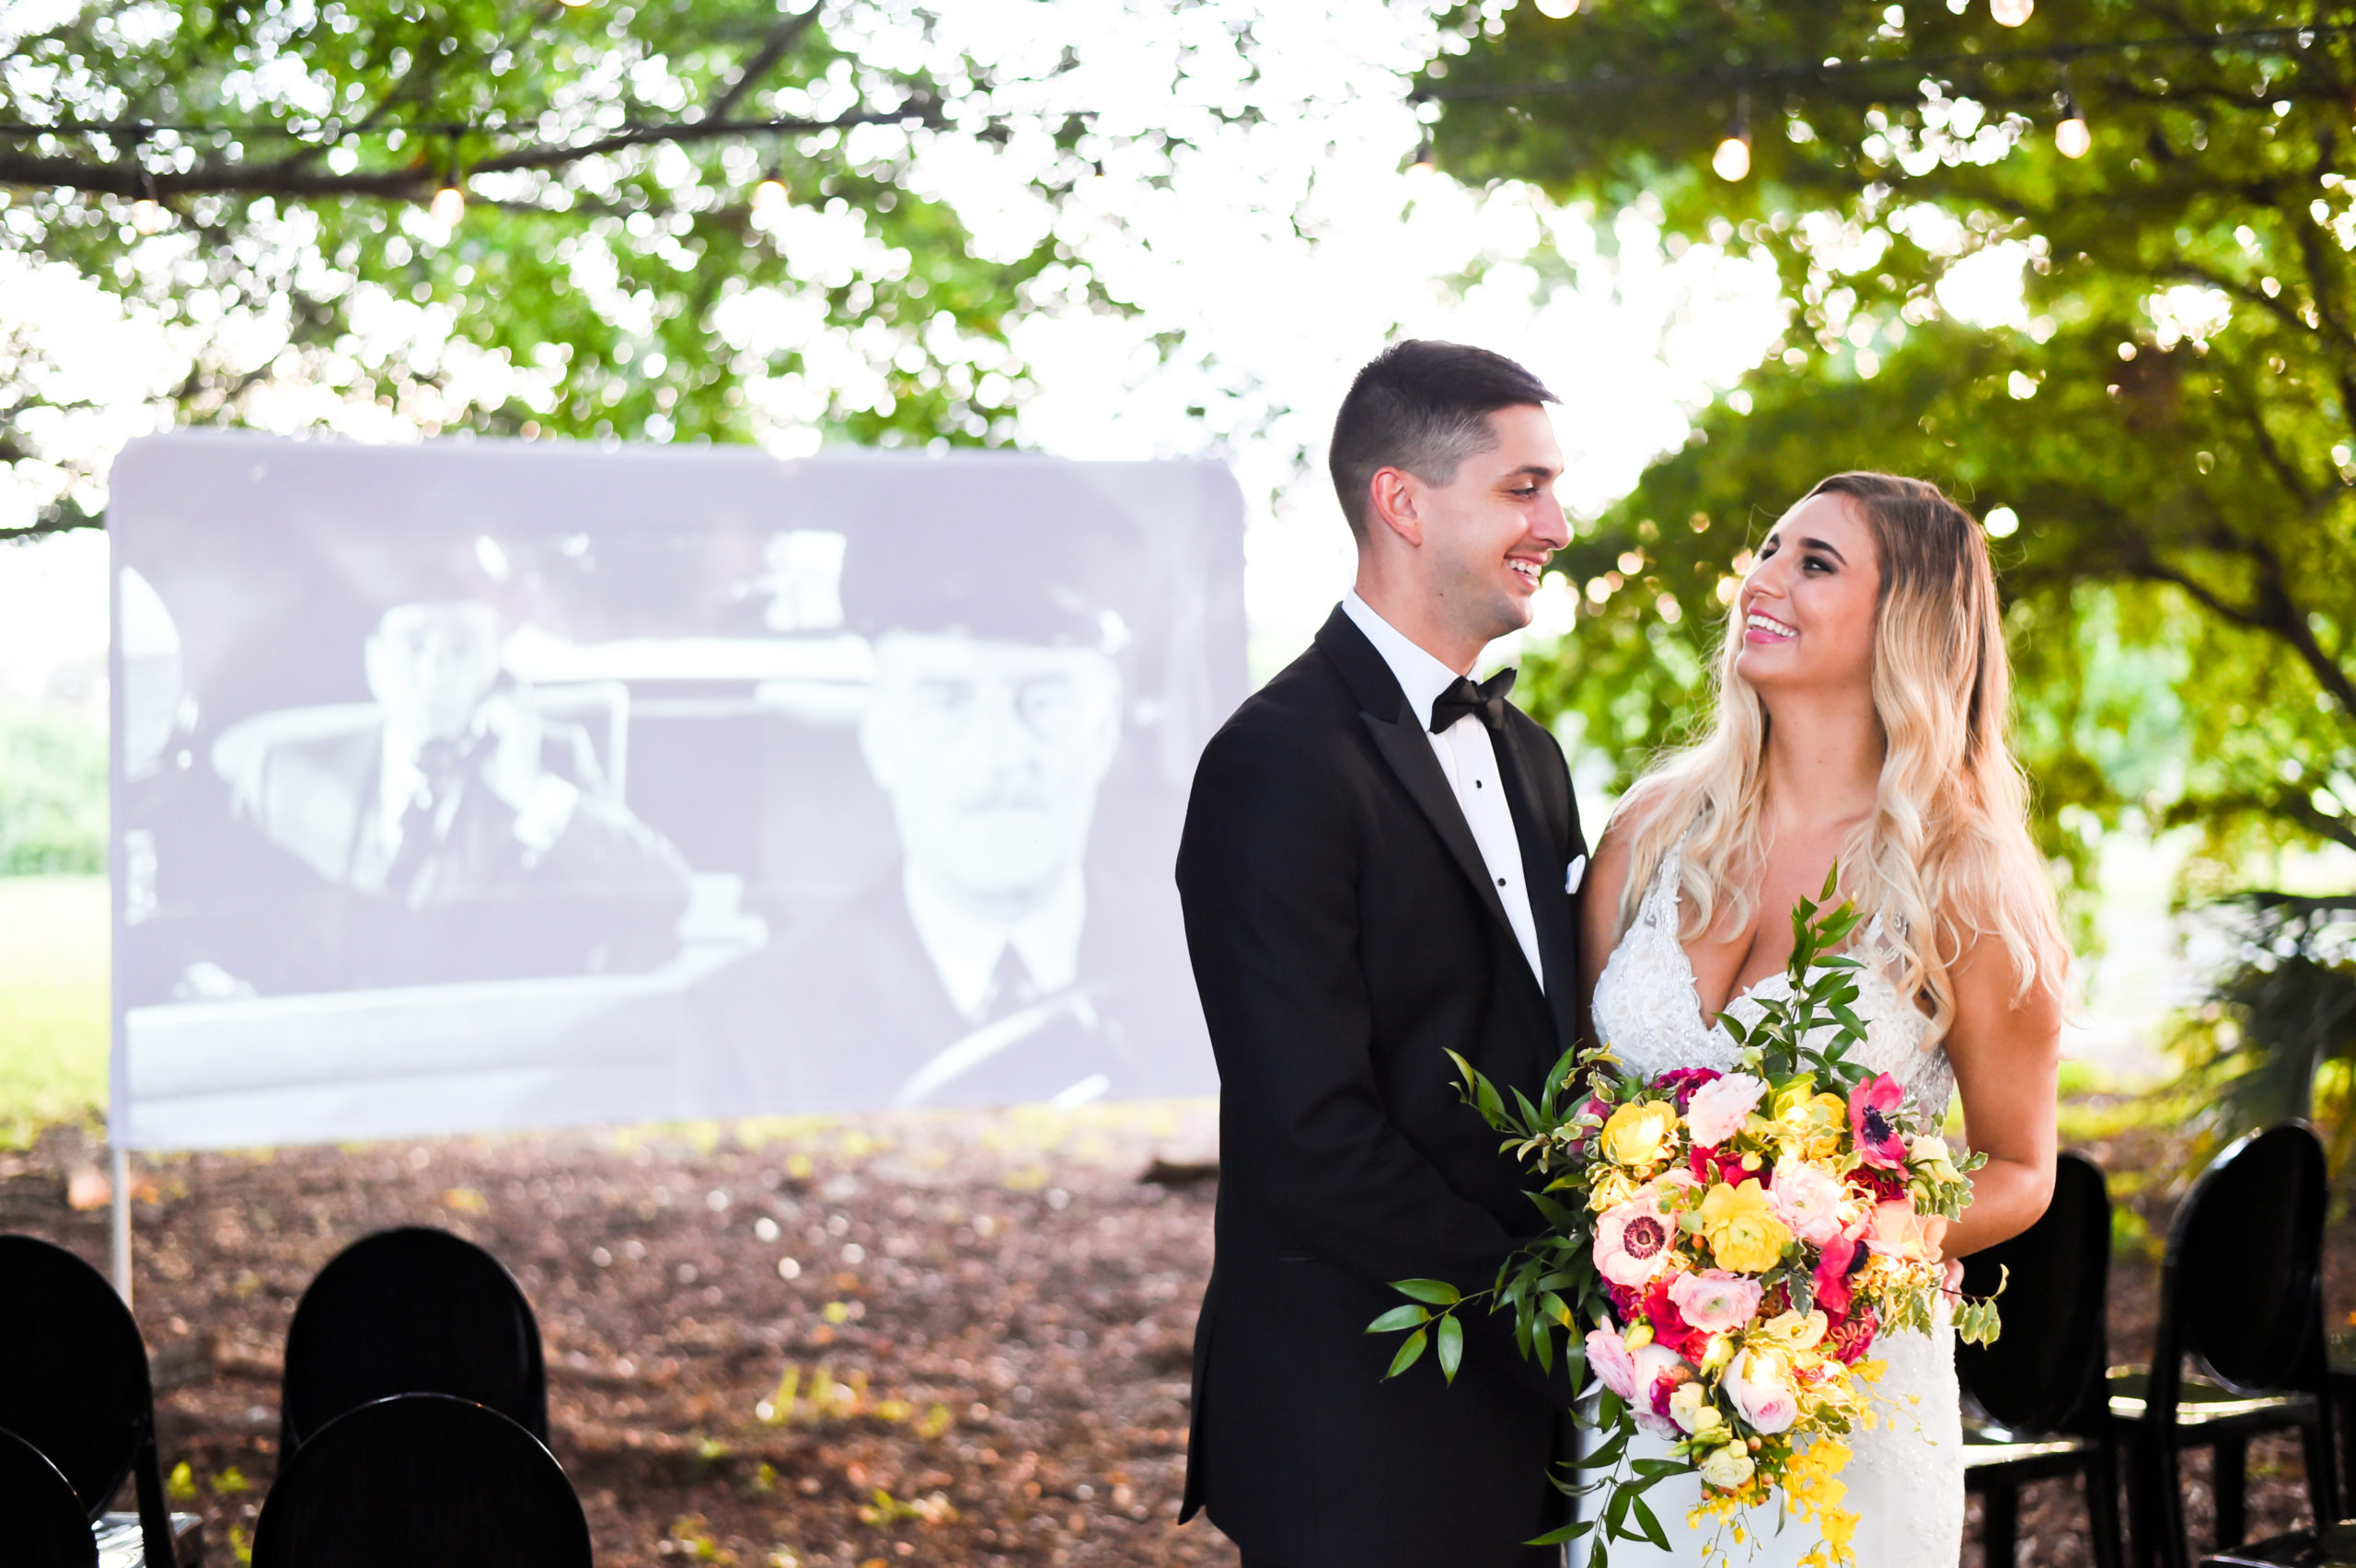 The bride and groom laugh as a movie plays on the projector screen behind them